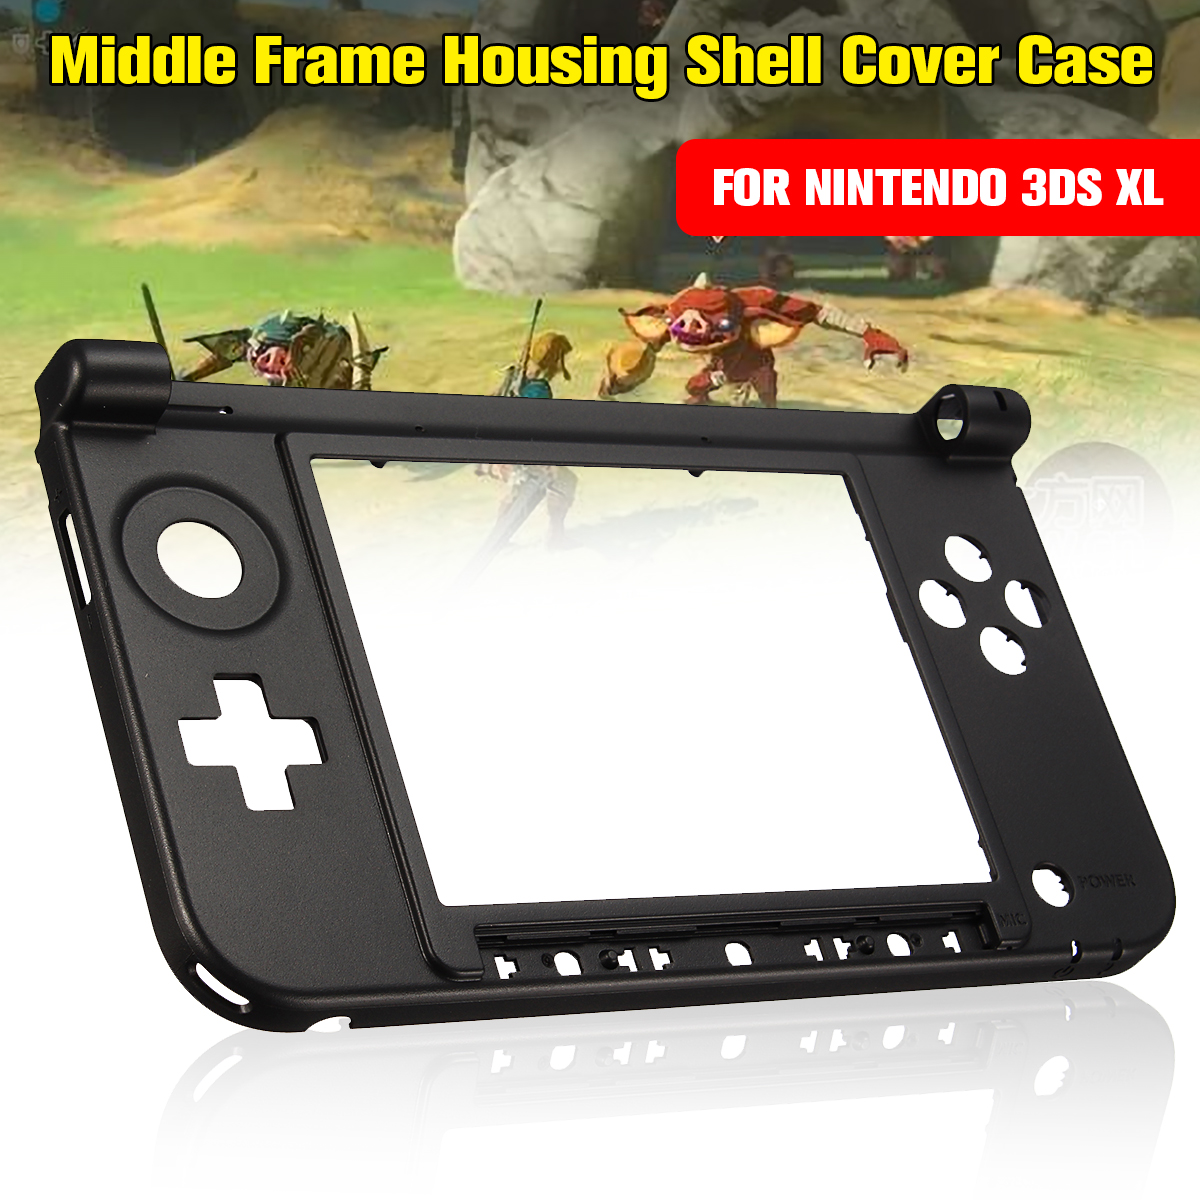 Replacement Bottom Middle Frame Housing Shell Cover Case for Nintendo 3DS XL 3DS LL Game Console 2